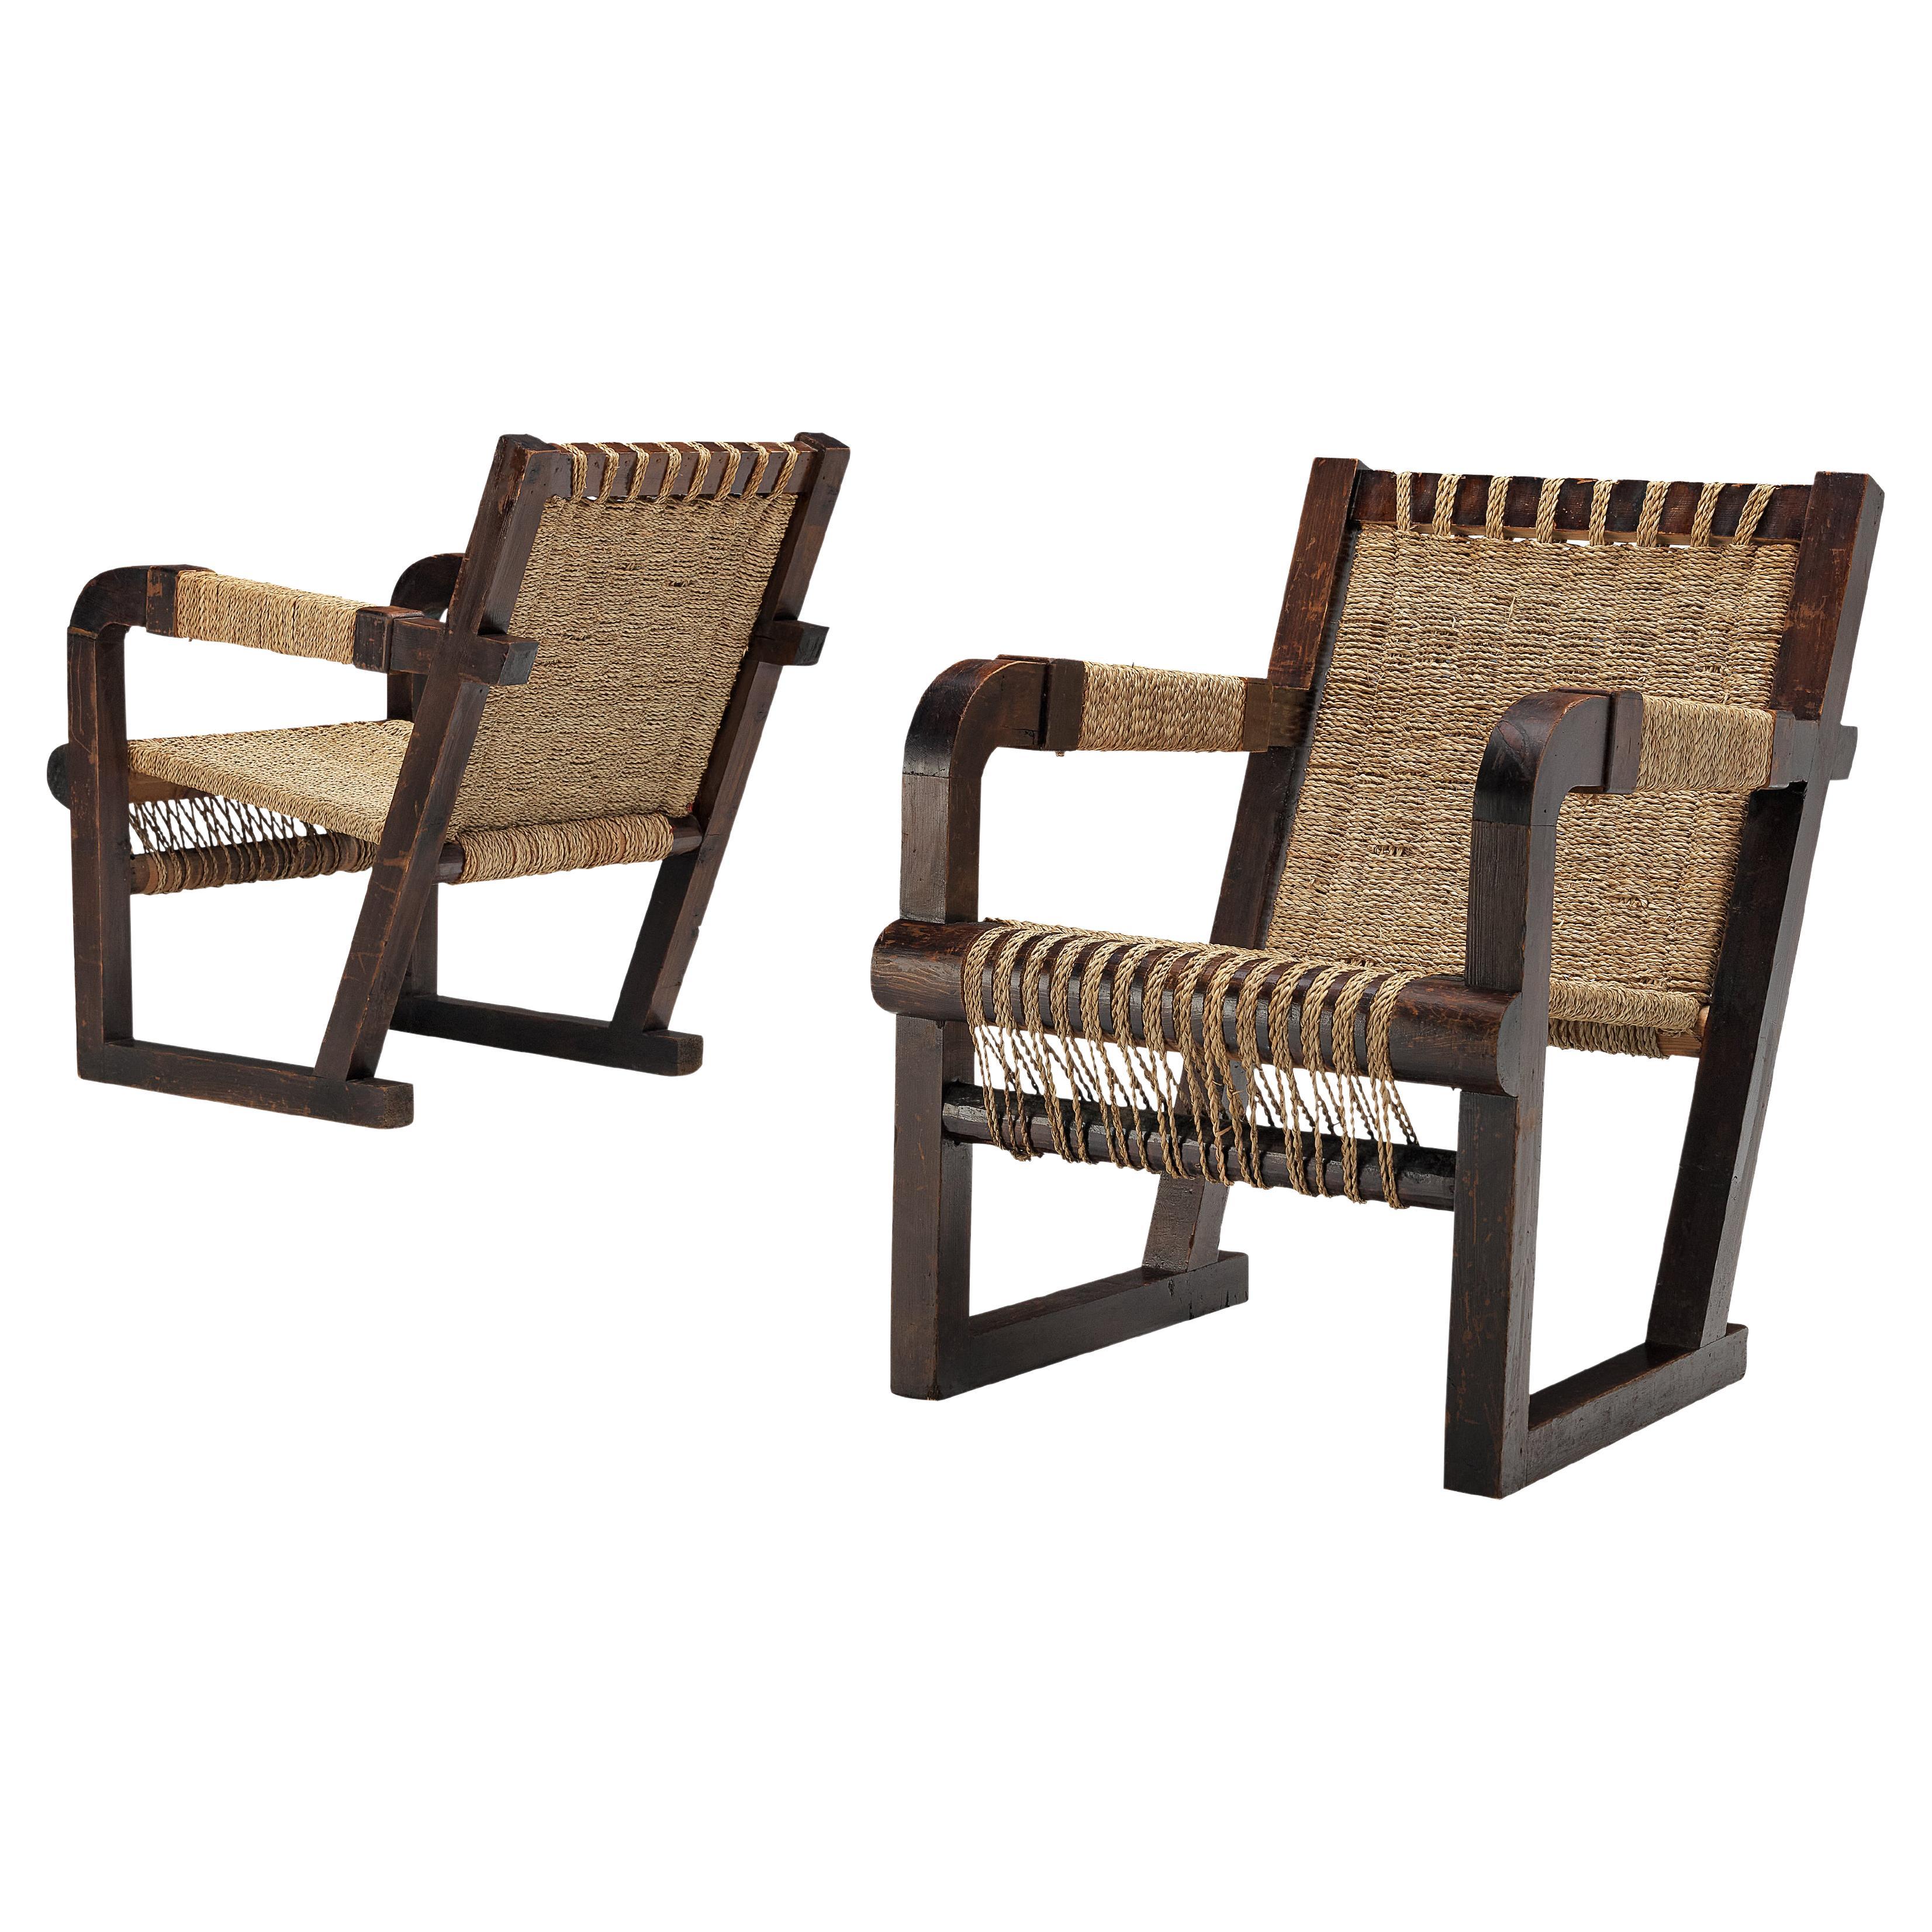 Francis Jourdain Pair of Lounge Chair with Woven Details